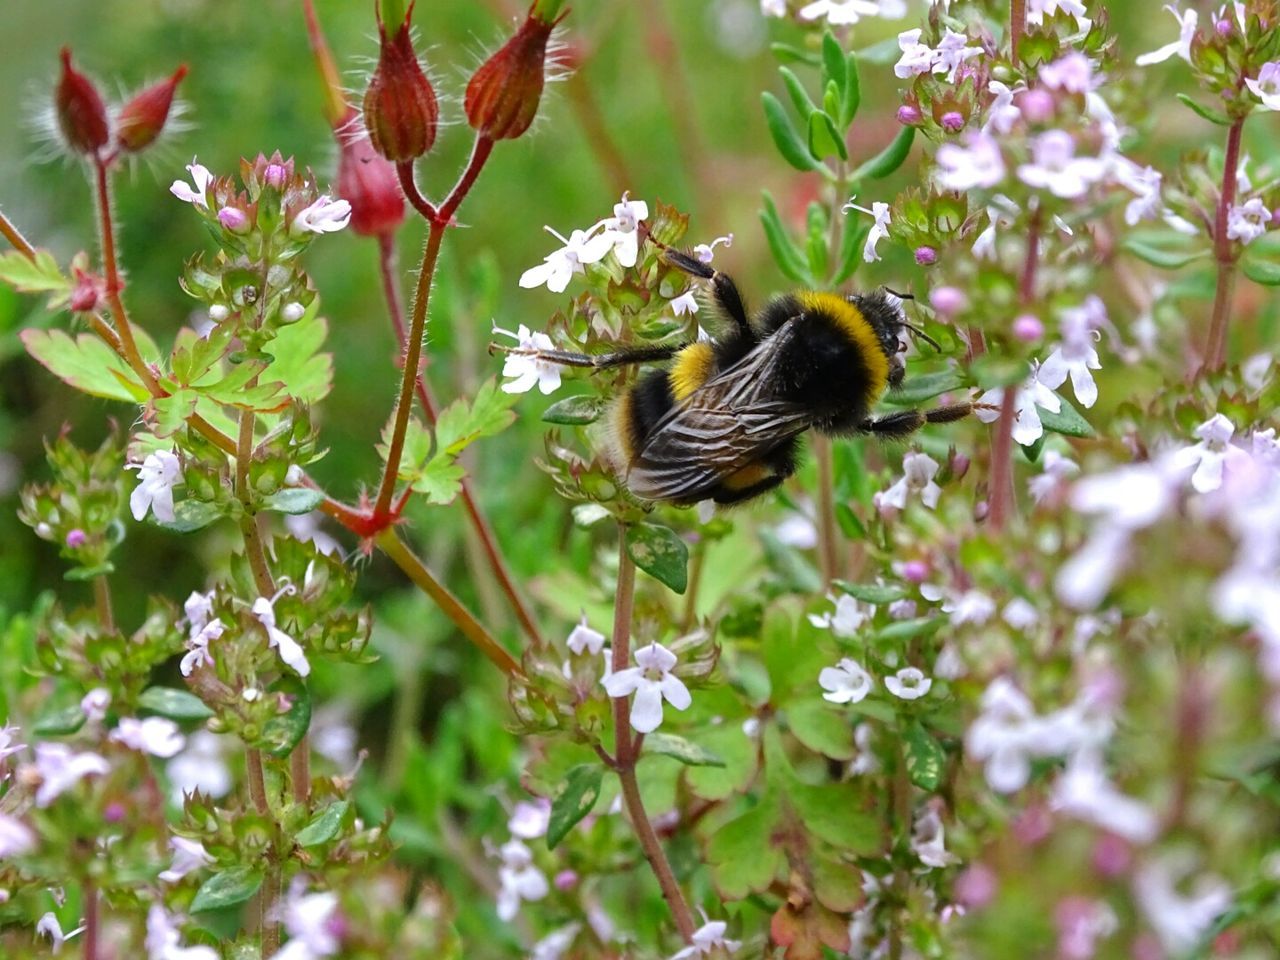 CLOSE-UP OF BEE POLLINATING ON FLOWERS